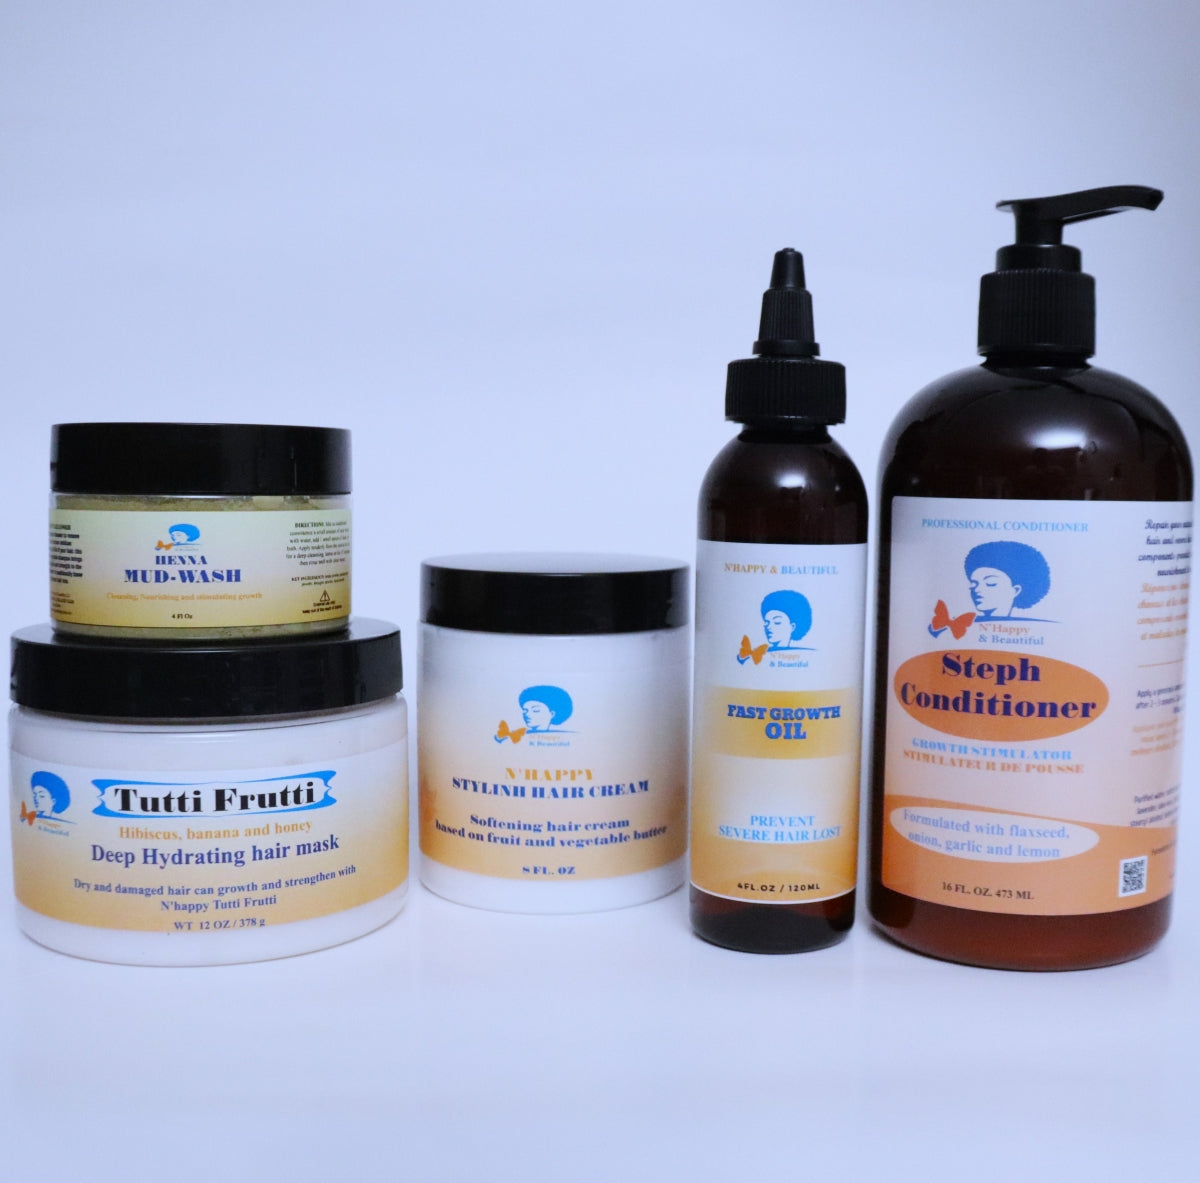 Fast & Growth Set / Hair loss Prevention/ 10 Sets / 5 Pieces natural & organic products / Wholesale / Private label